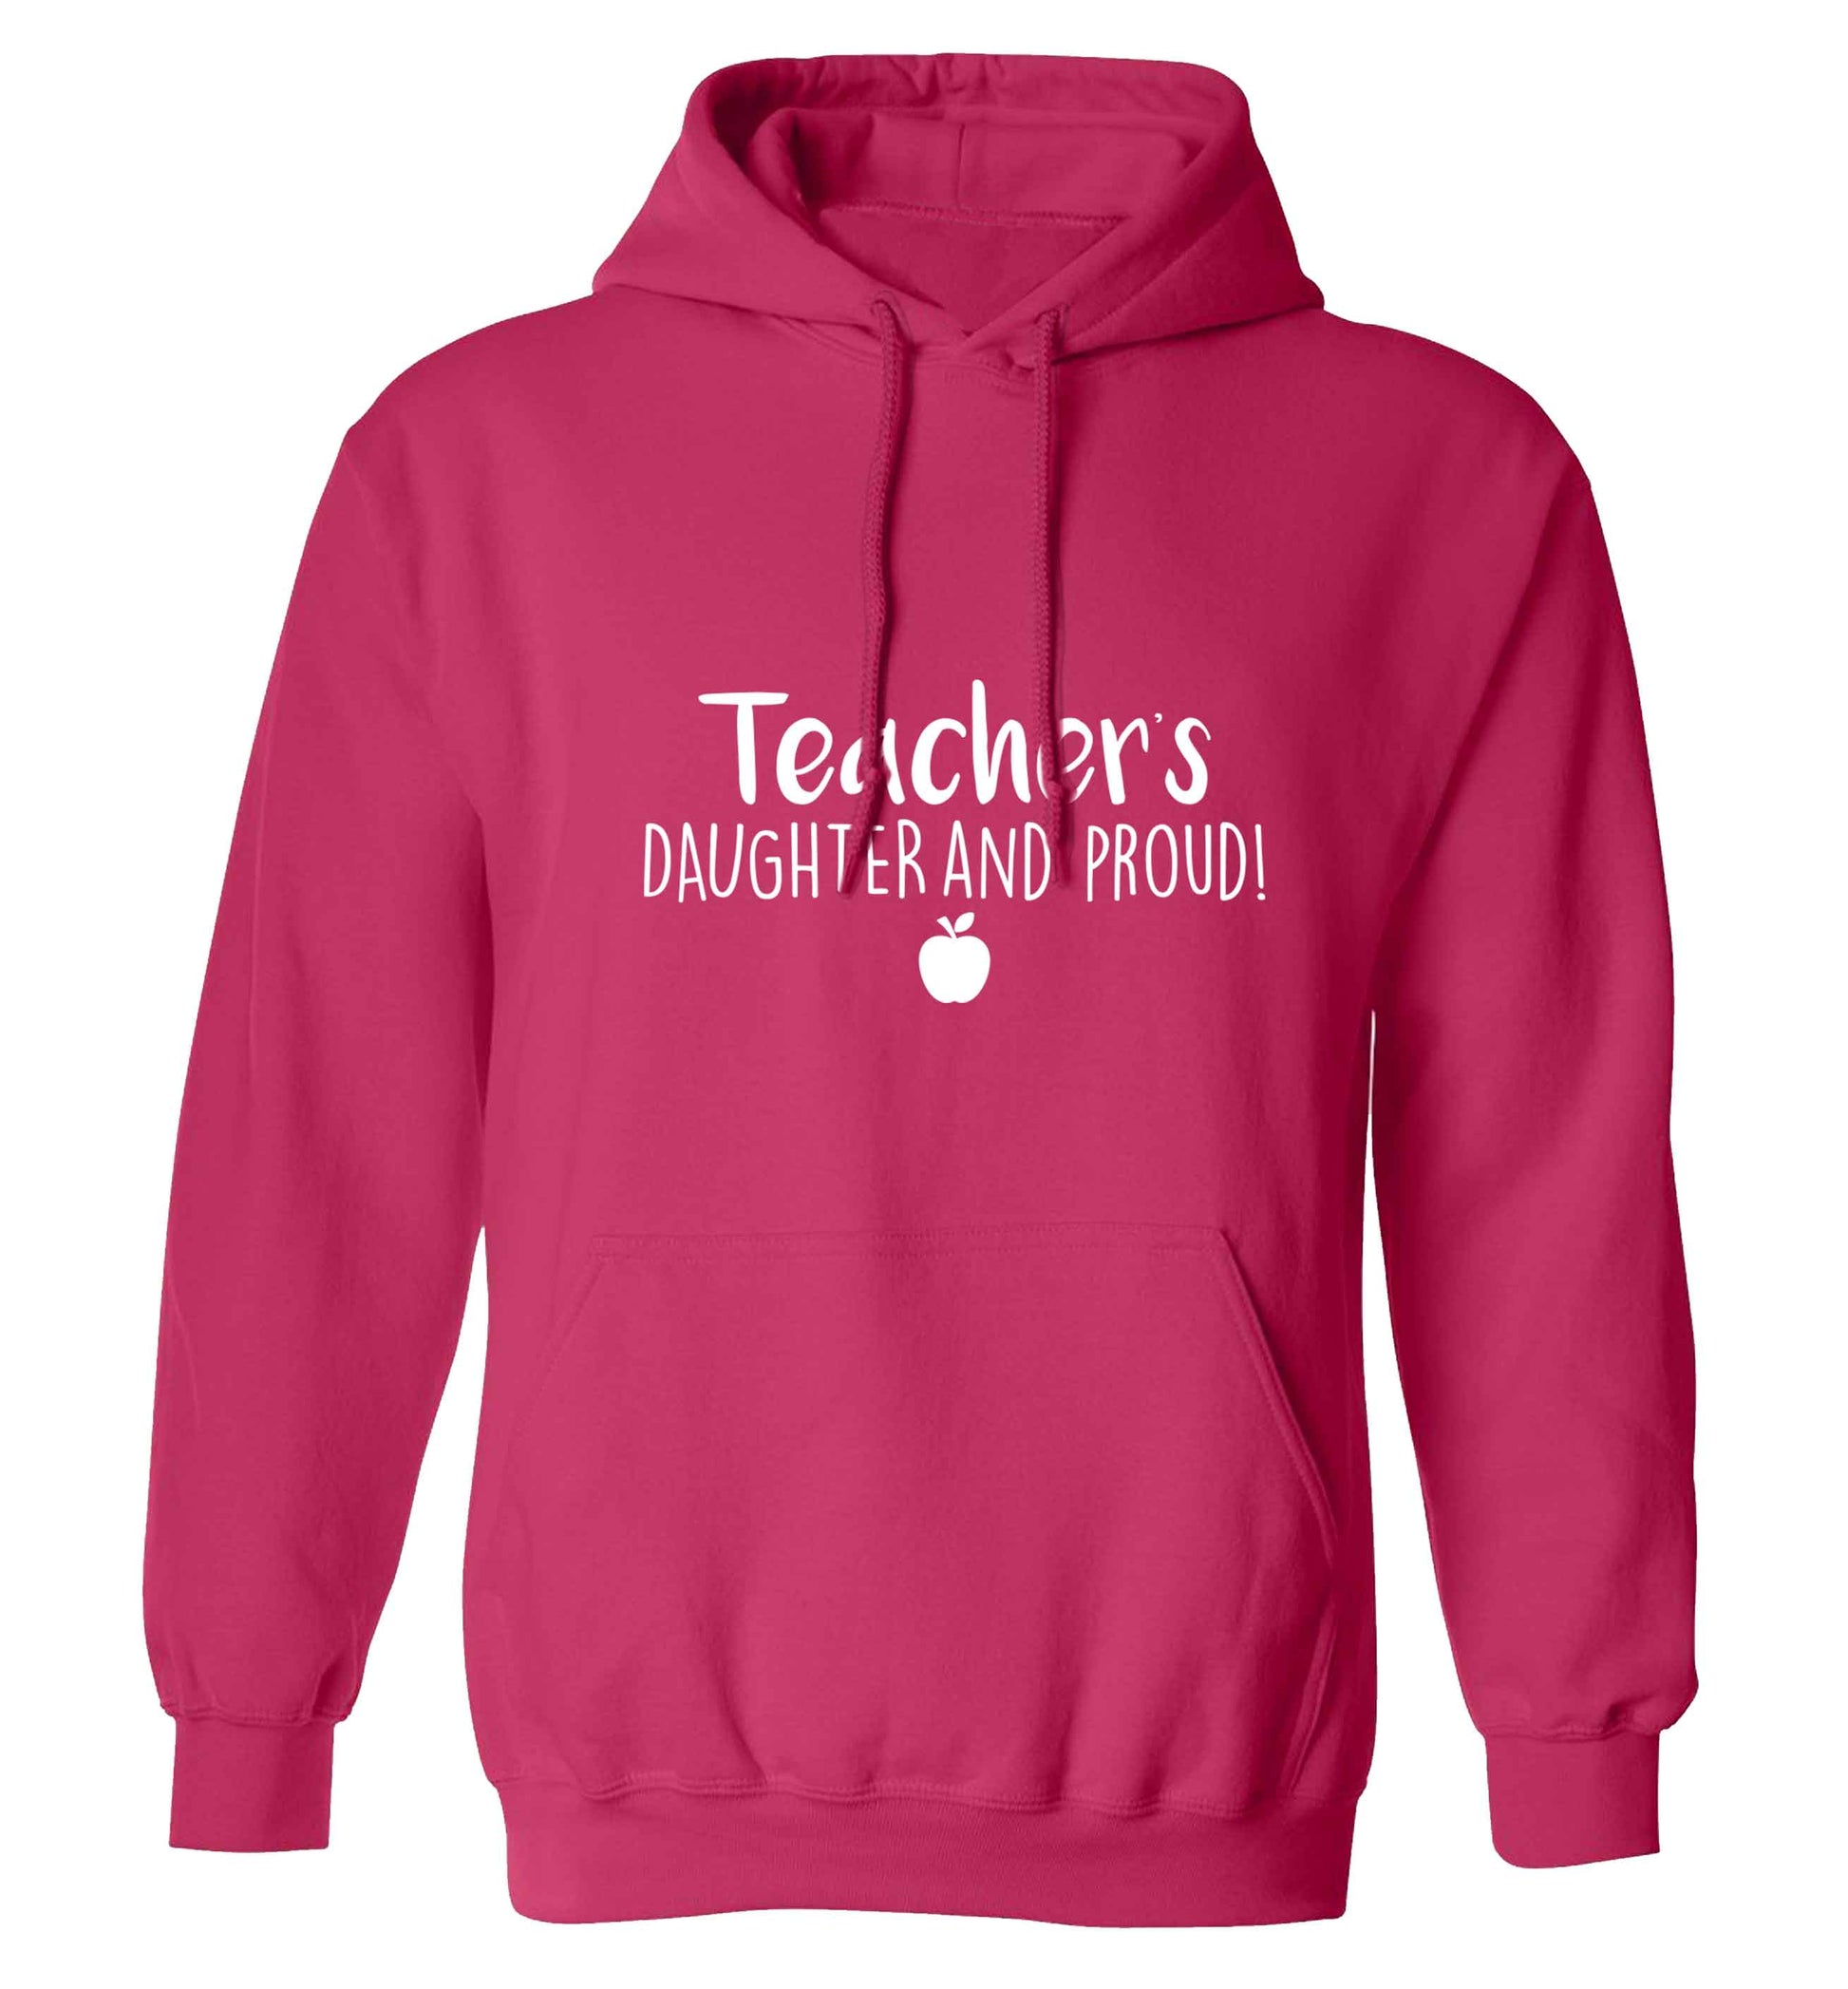 Teachers daughter and proud adults unisex pink hoodie 2XL